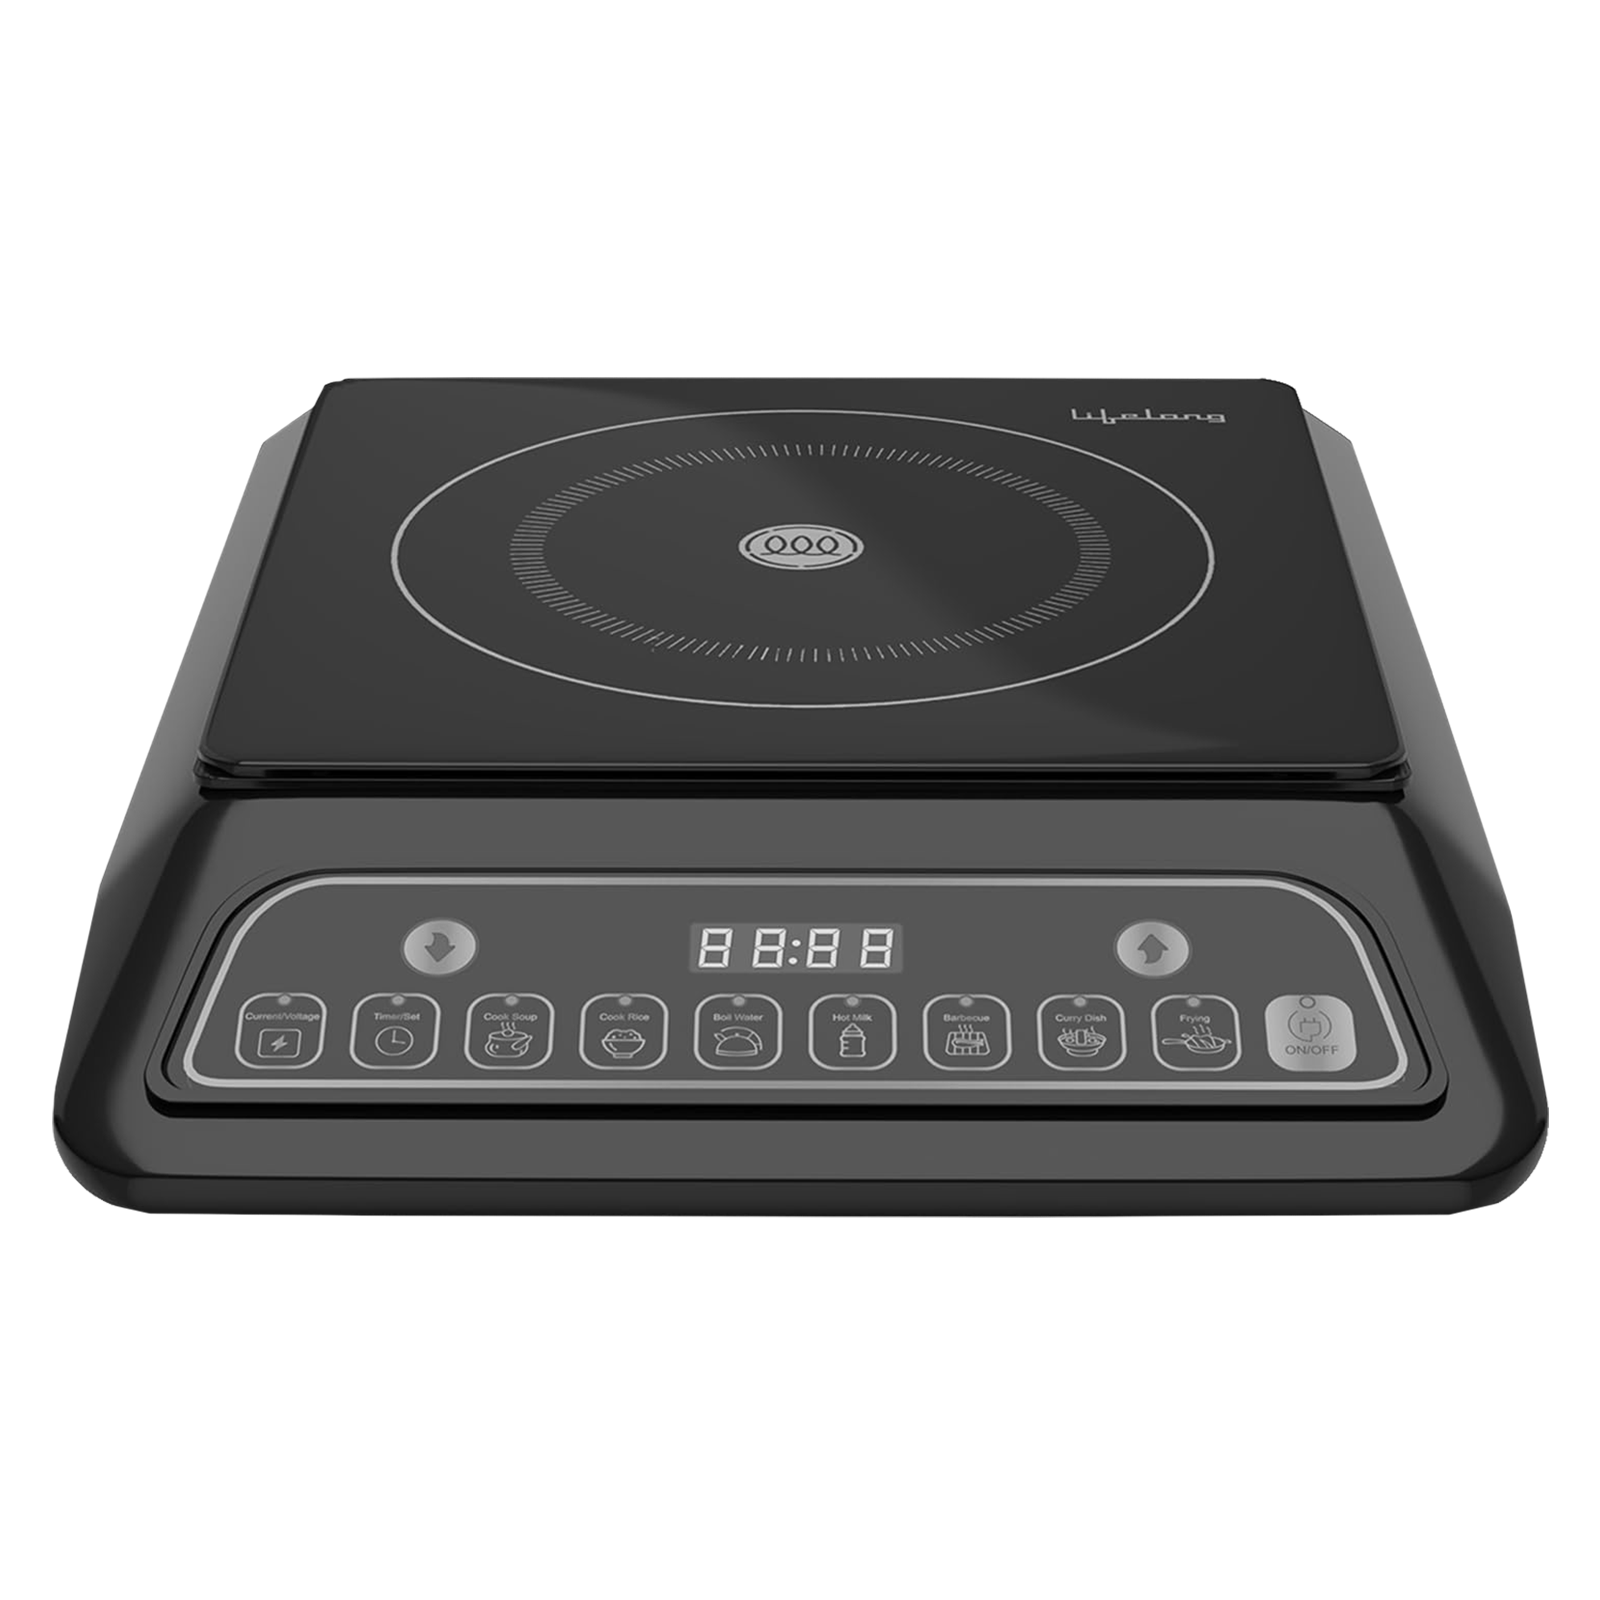 Buy Croma 1200W Induction Cooktop with 7 Preset Menus Online - Croma